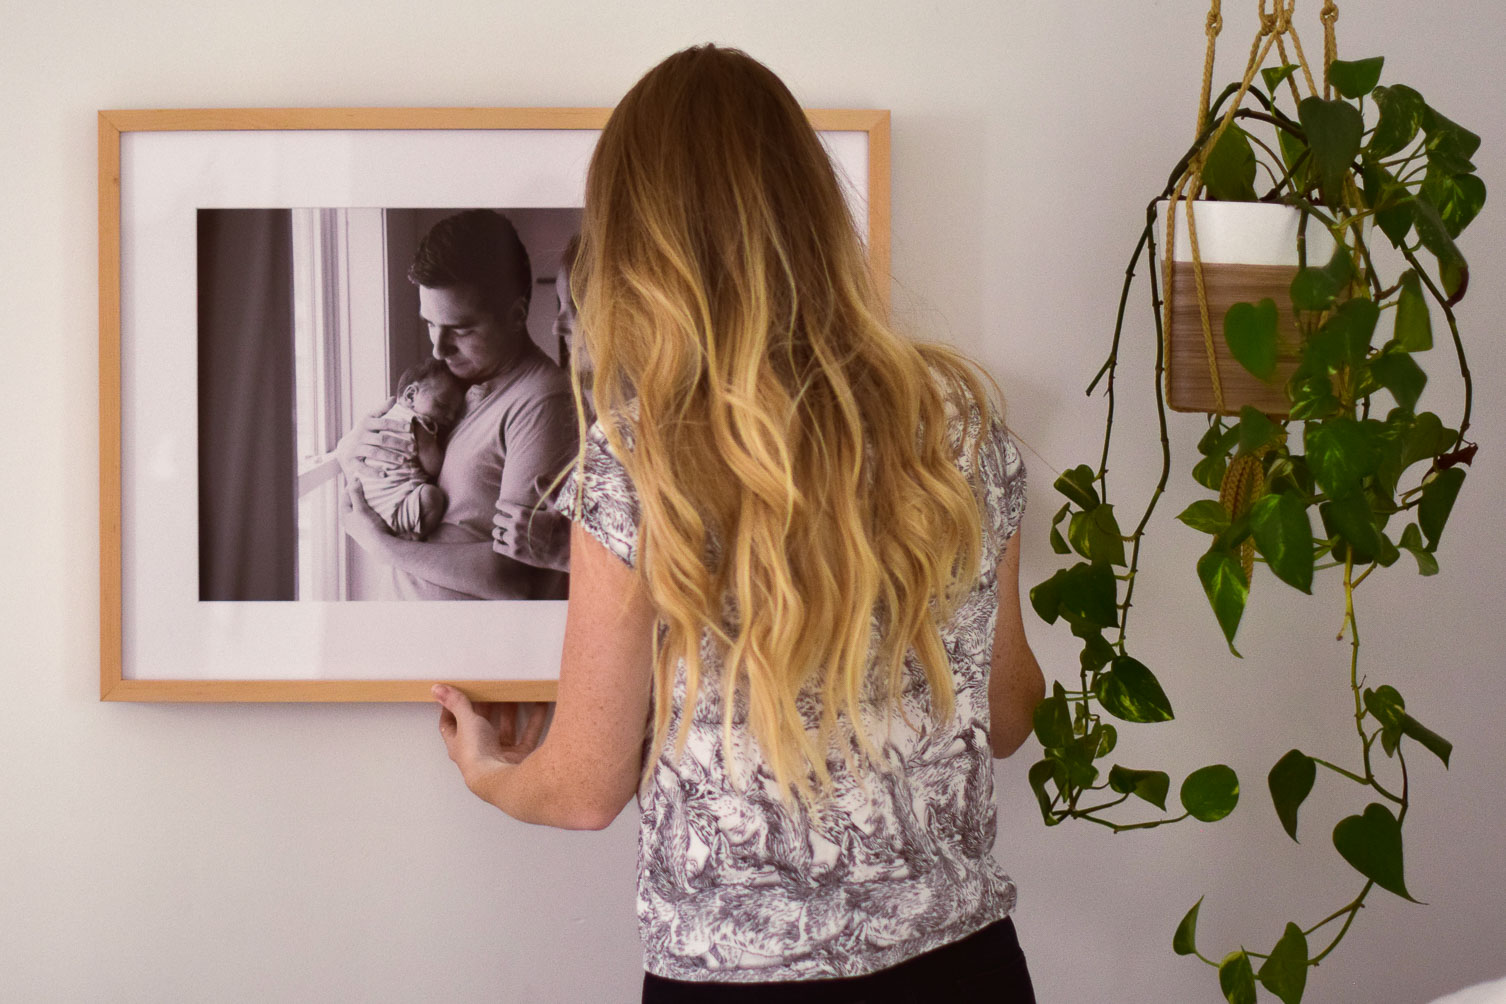 sharing how we used the custom design Framebridge services to display our newborn photos on one brass fox